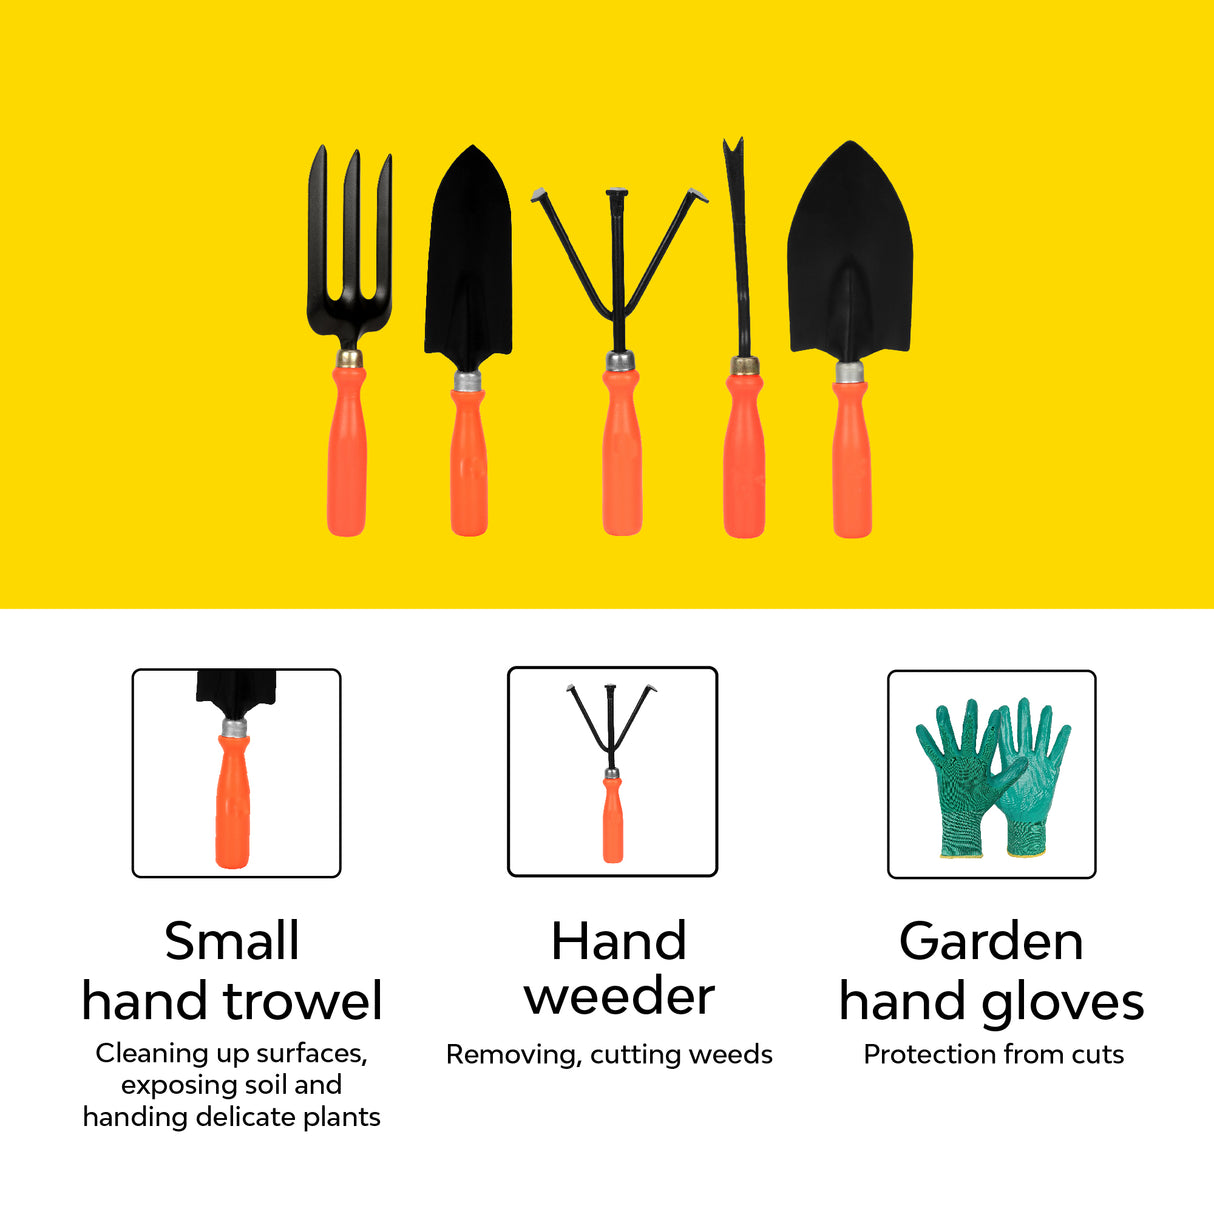 Home garden tools with gloves